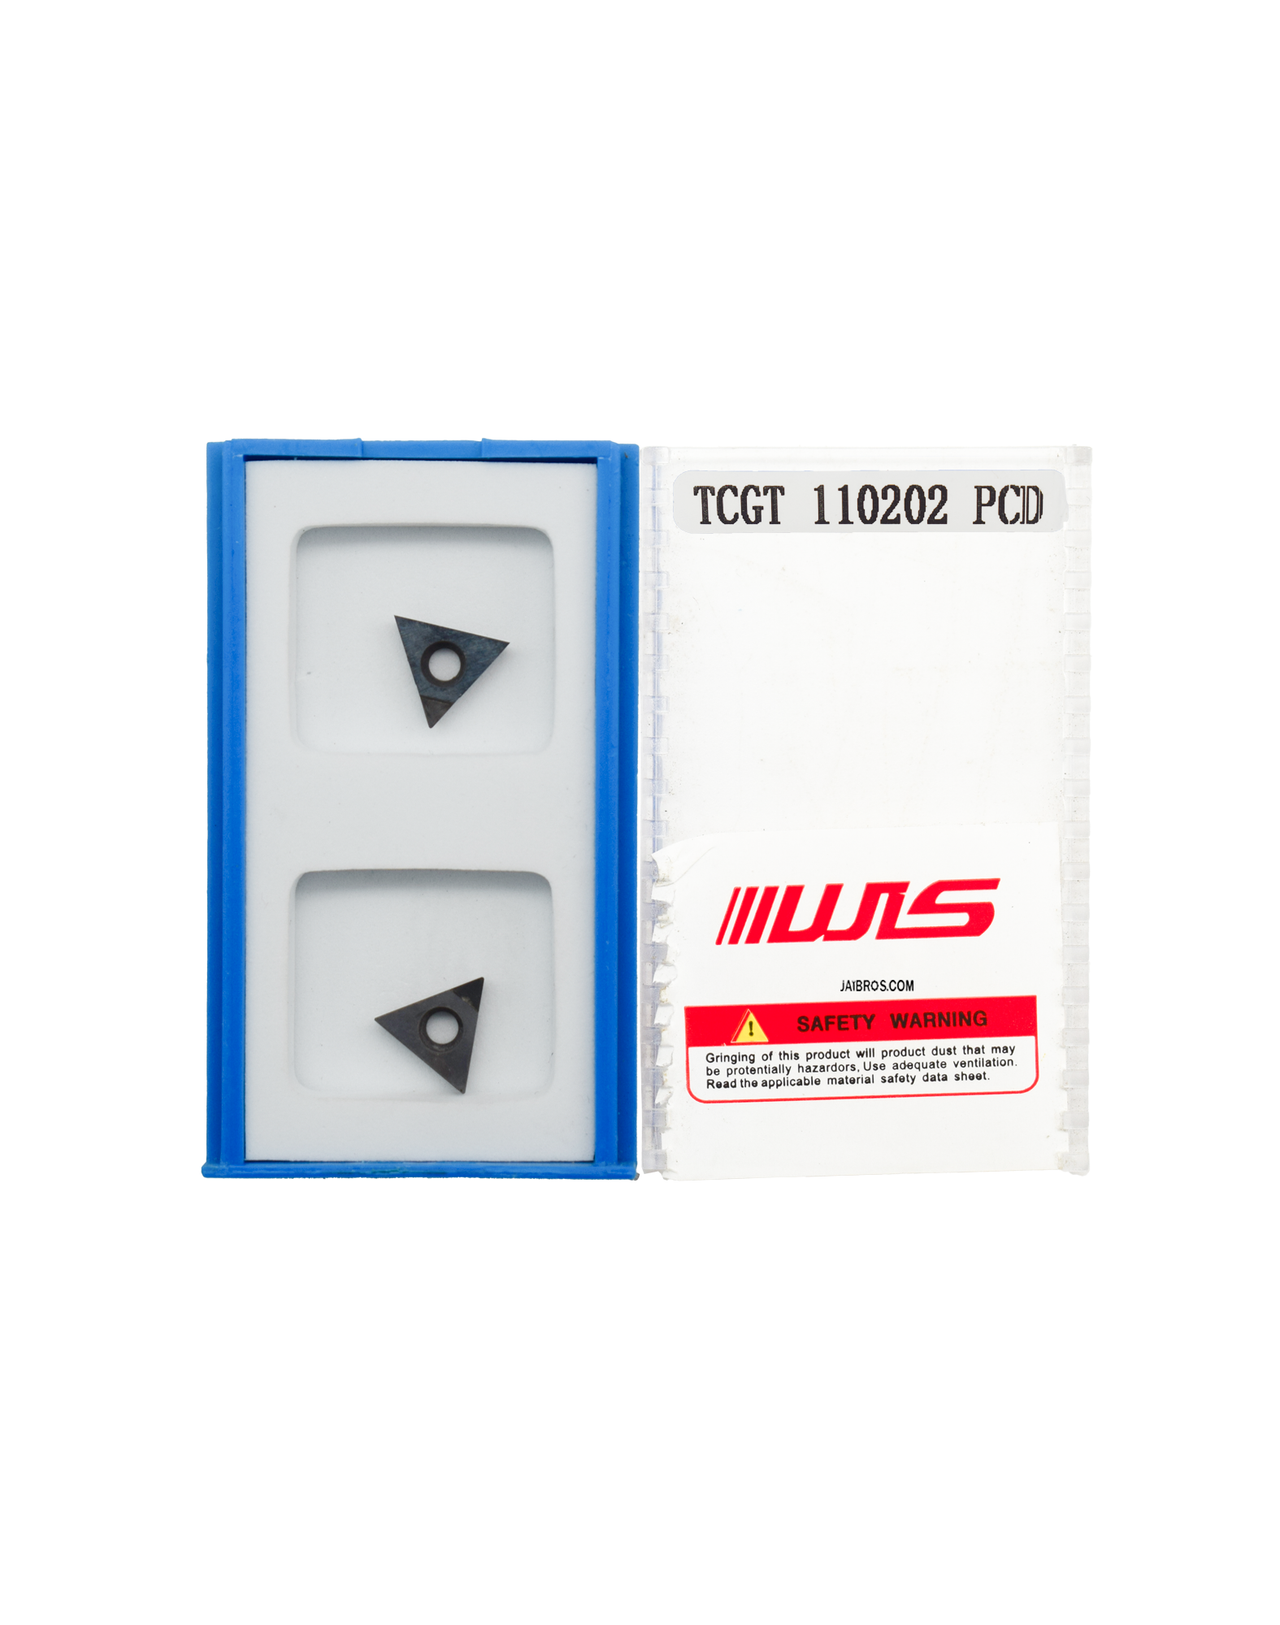 WS TCGW110202 pcd insert Pack of 2